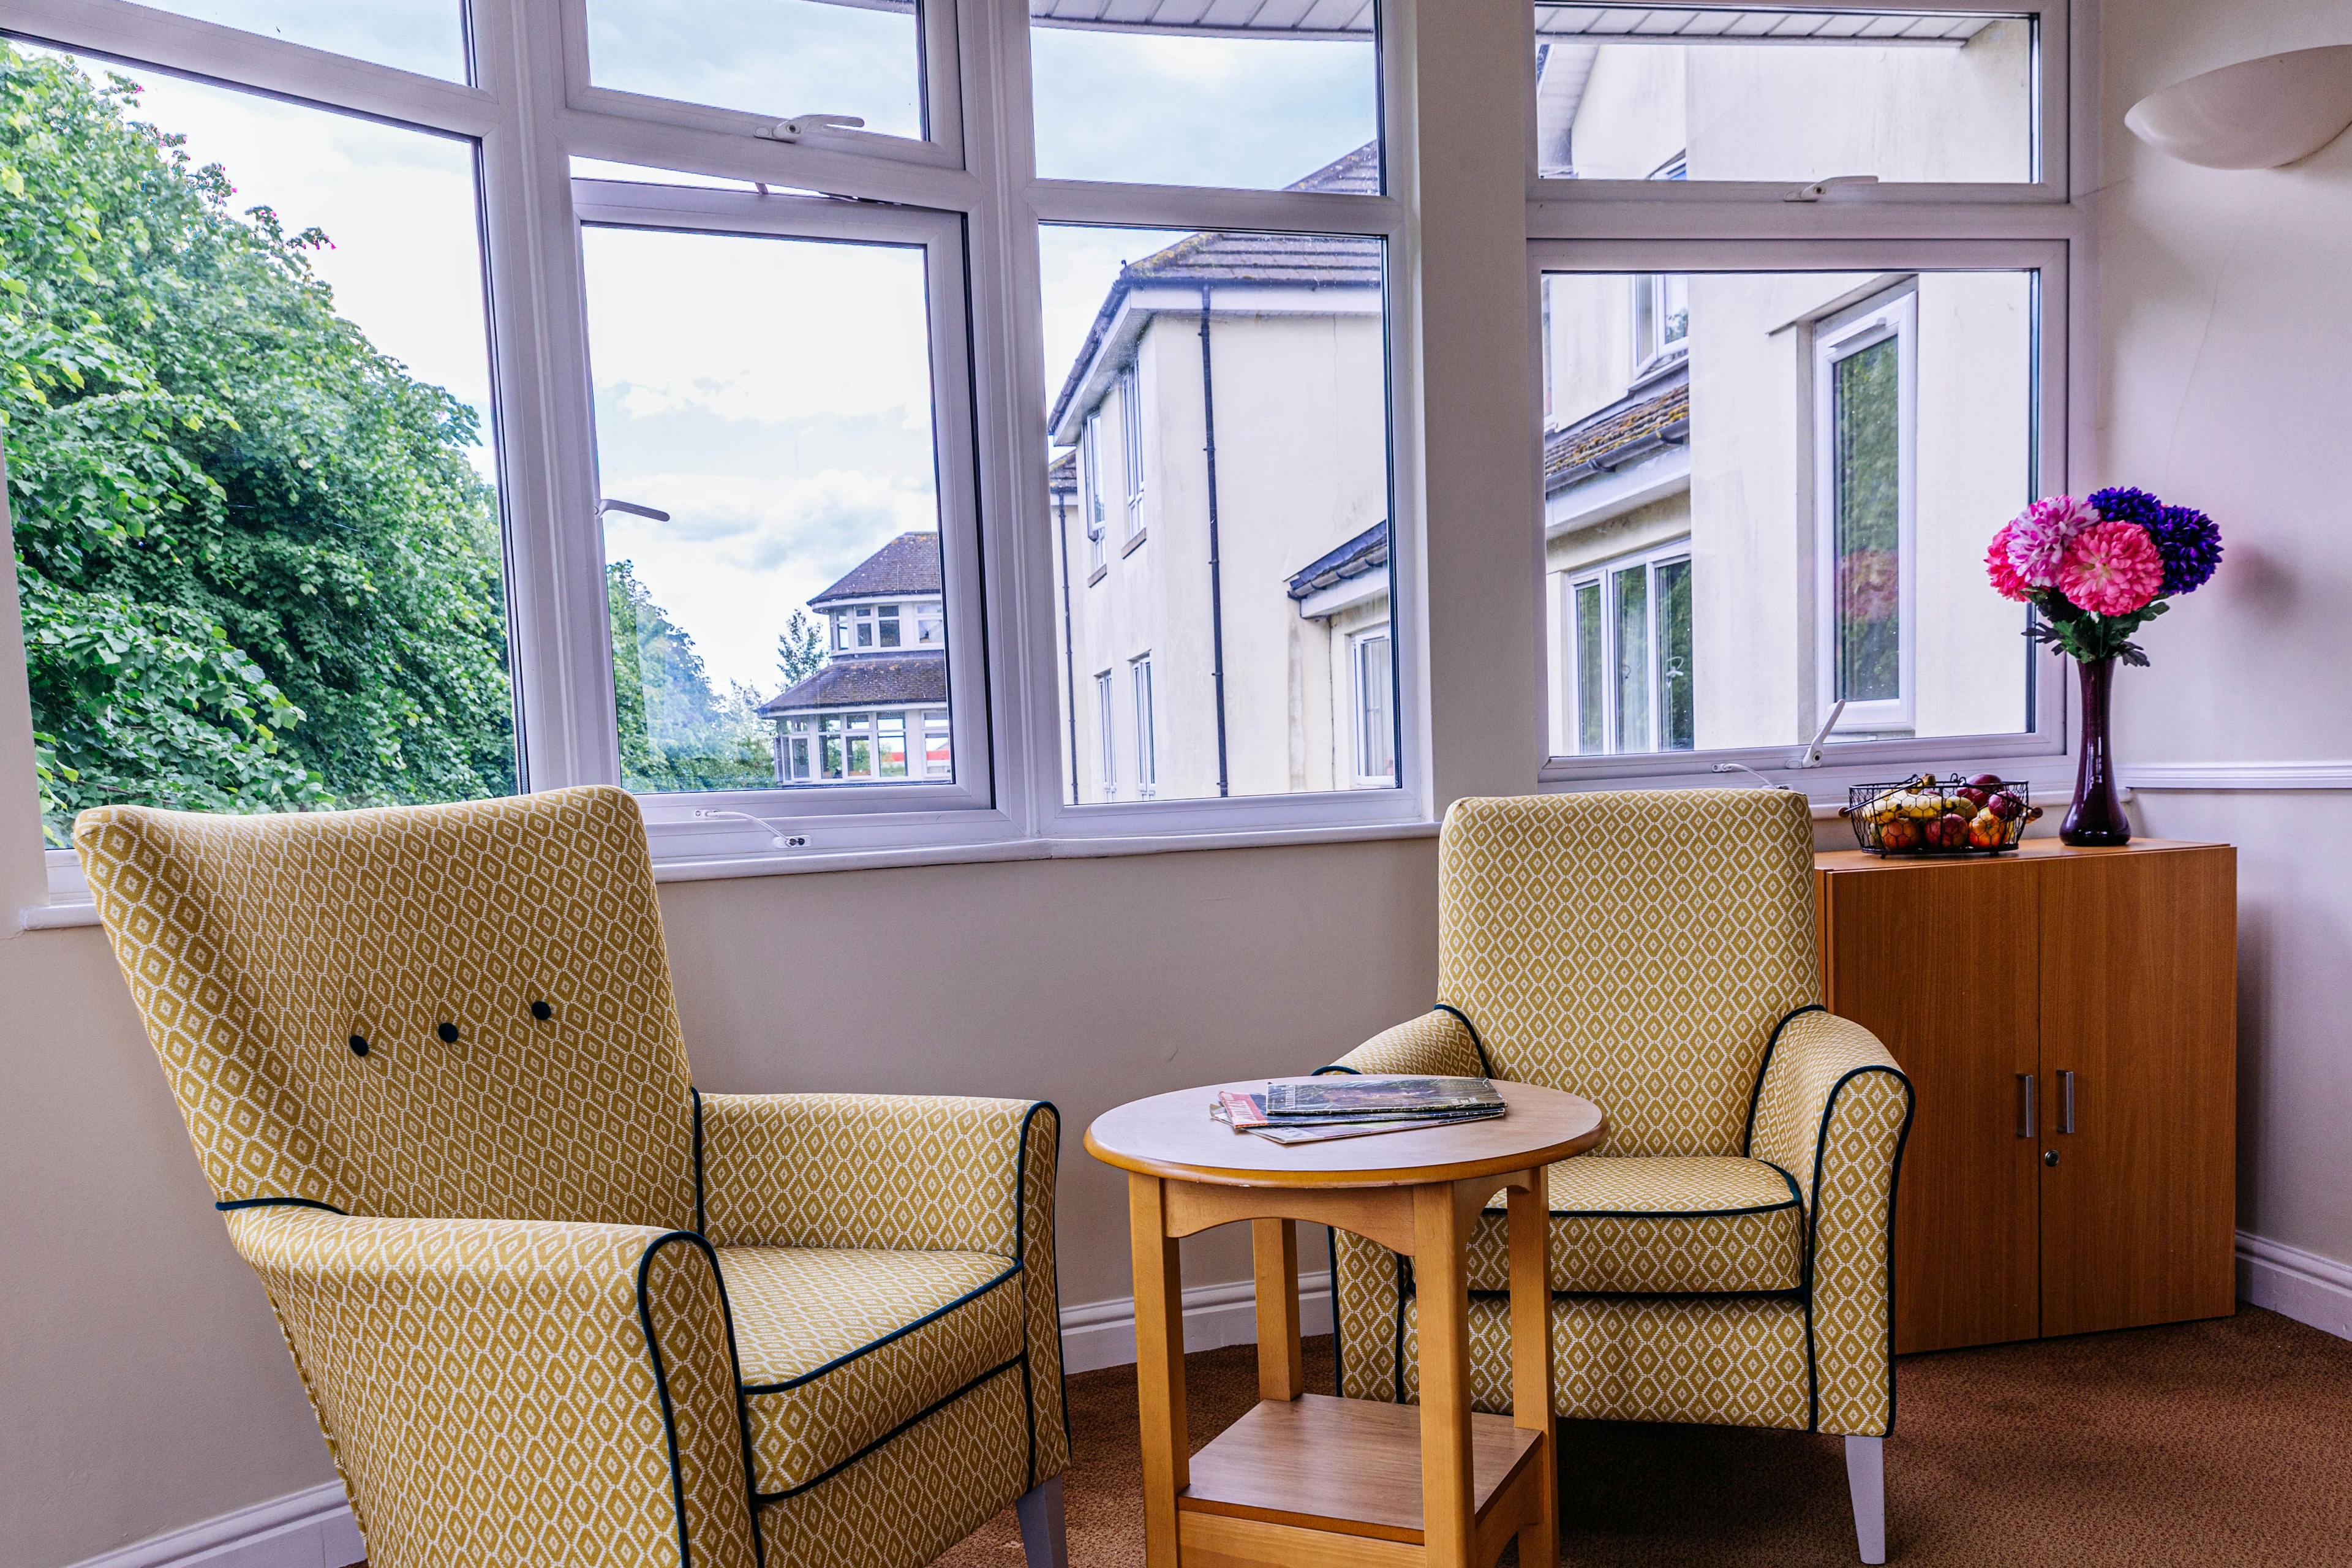 Communal Area of Kingswood Court Care Home in Bristol, South West England